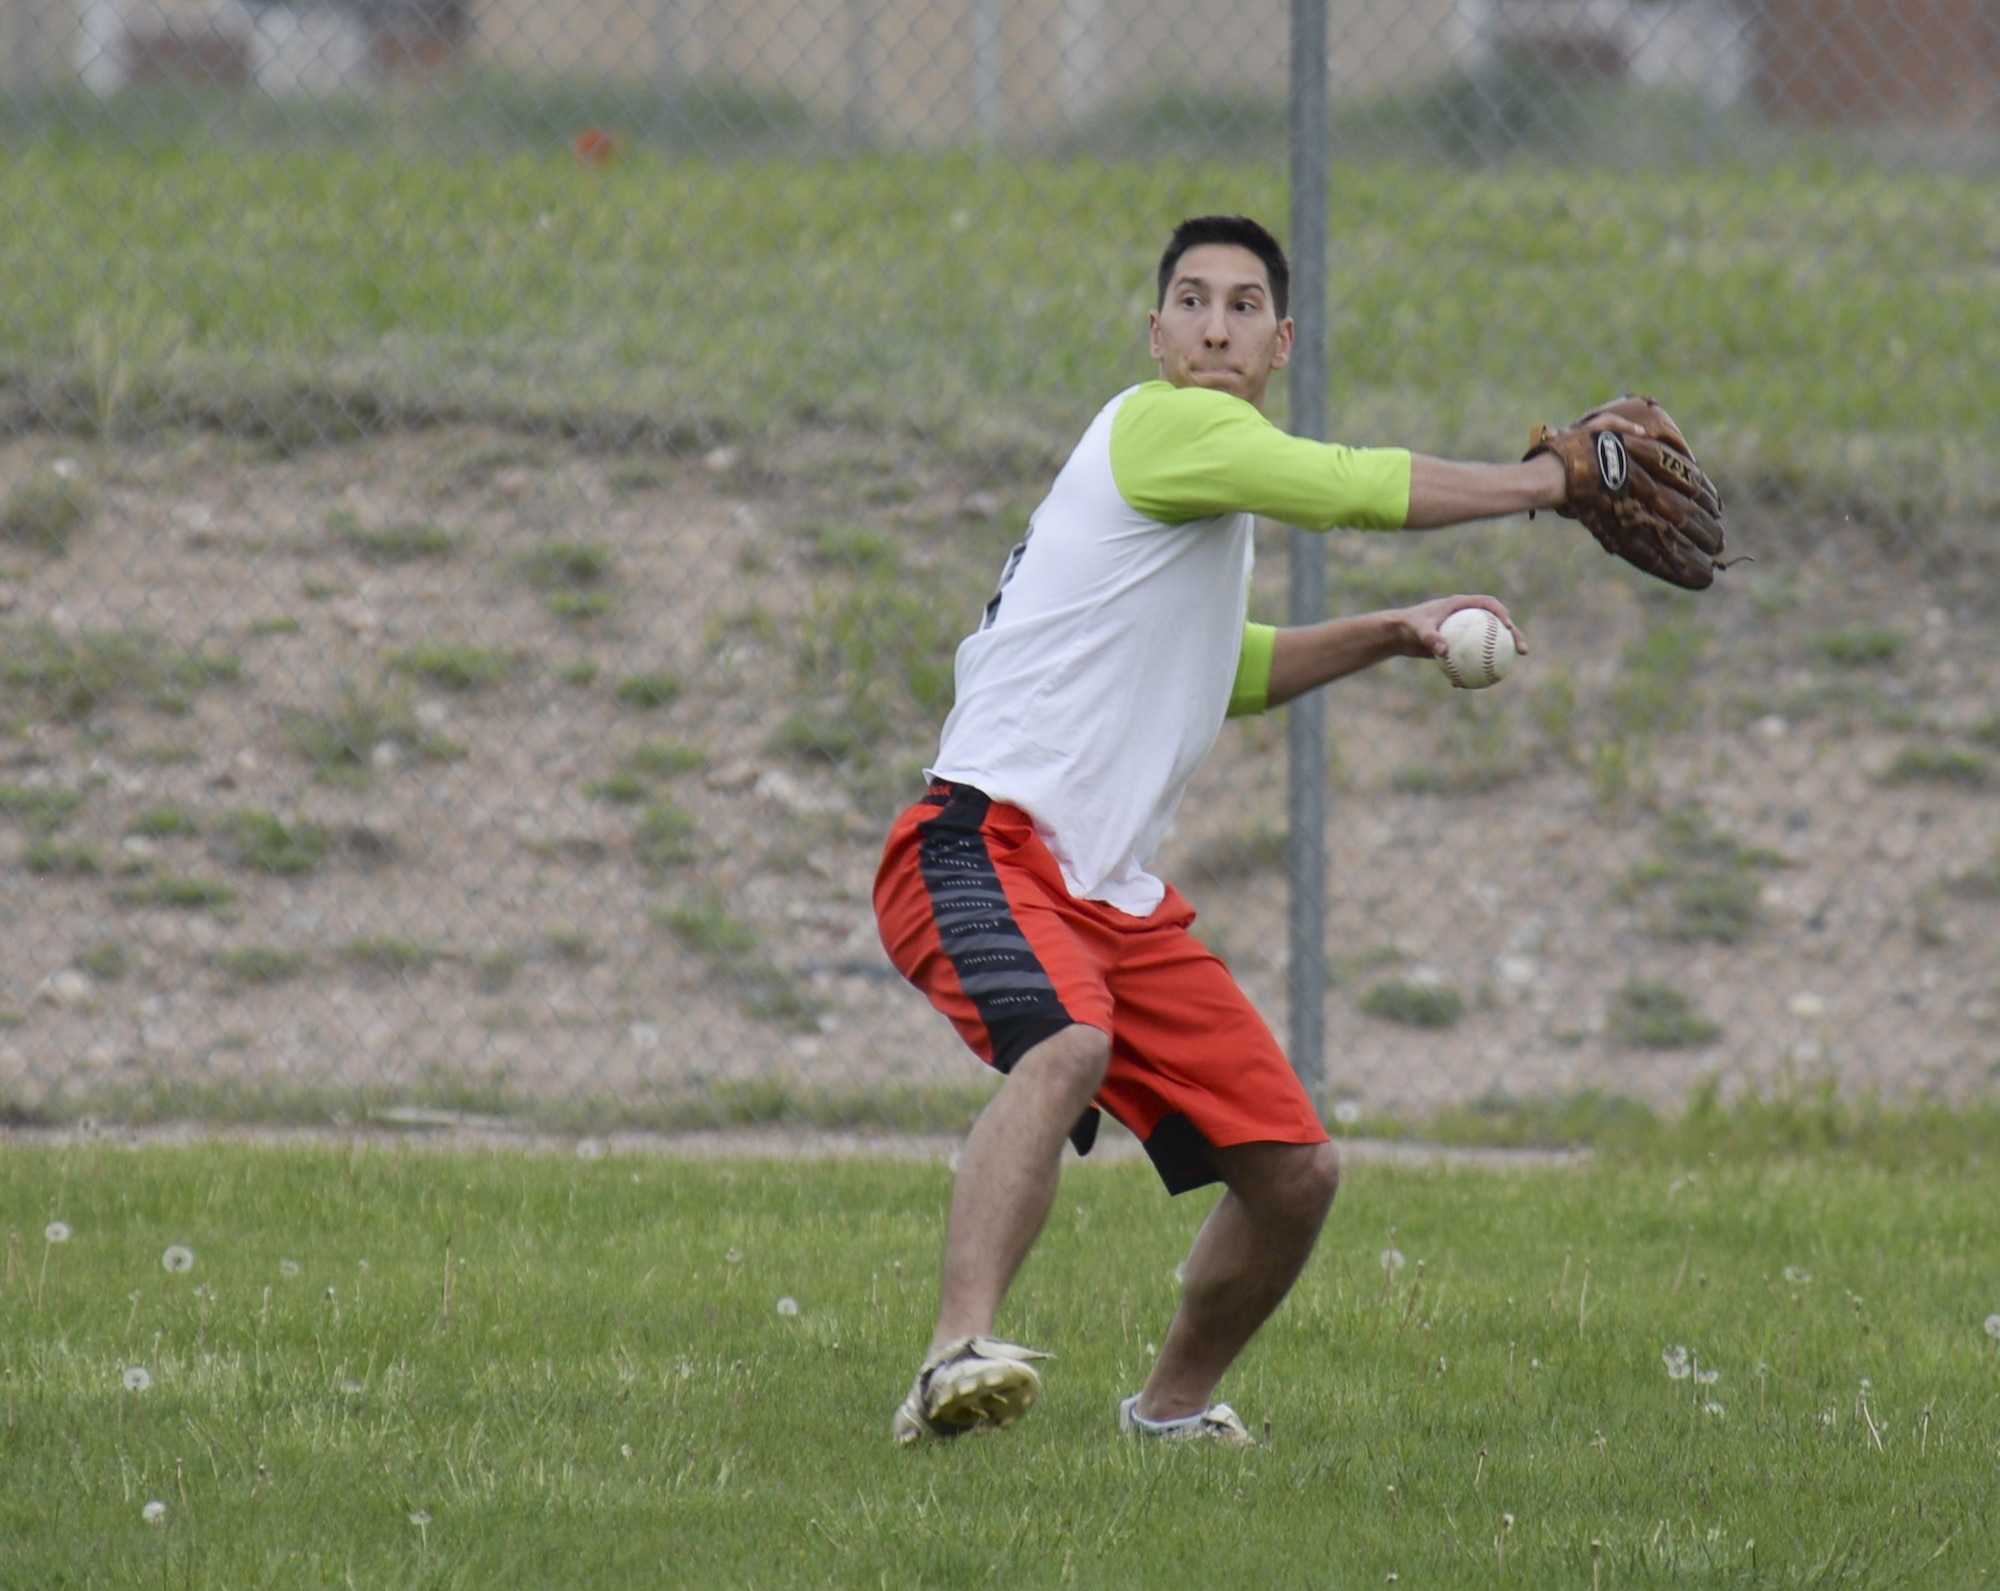 Chris Pilla, 90th Munitions Squadron intramural softball team player, throws the ball from the outfield during a play against the 790th Missile Security Forces Squadron team May 31, 2016, on one of the F.E. Warren Air Force Base, Wyo., ball fields. The MUNS team went on to win, making their record 3 and 0 for the season. (U.S. Air Force photo by Senior Airman Jason Wiese)